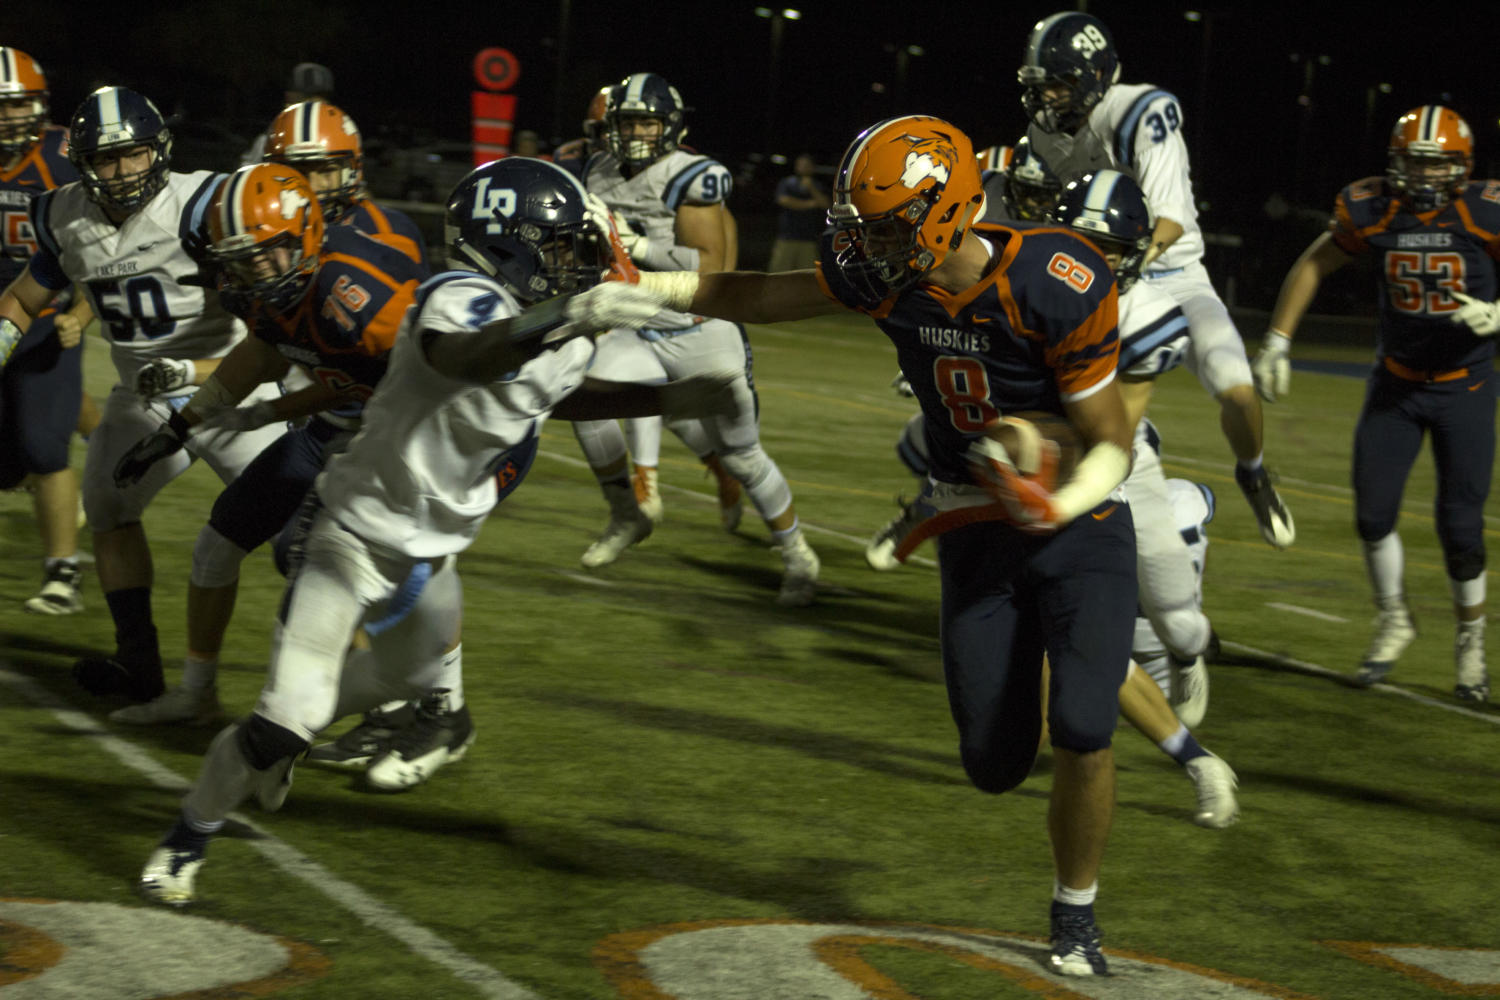 Huskie football improves to 4-0 with come-from-behind victory on Homecoming Night